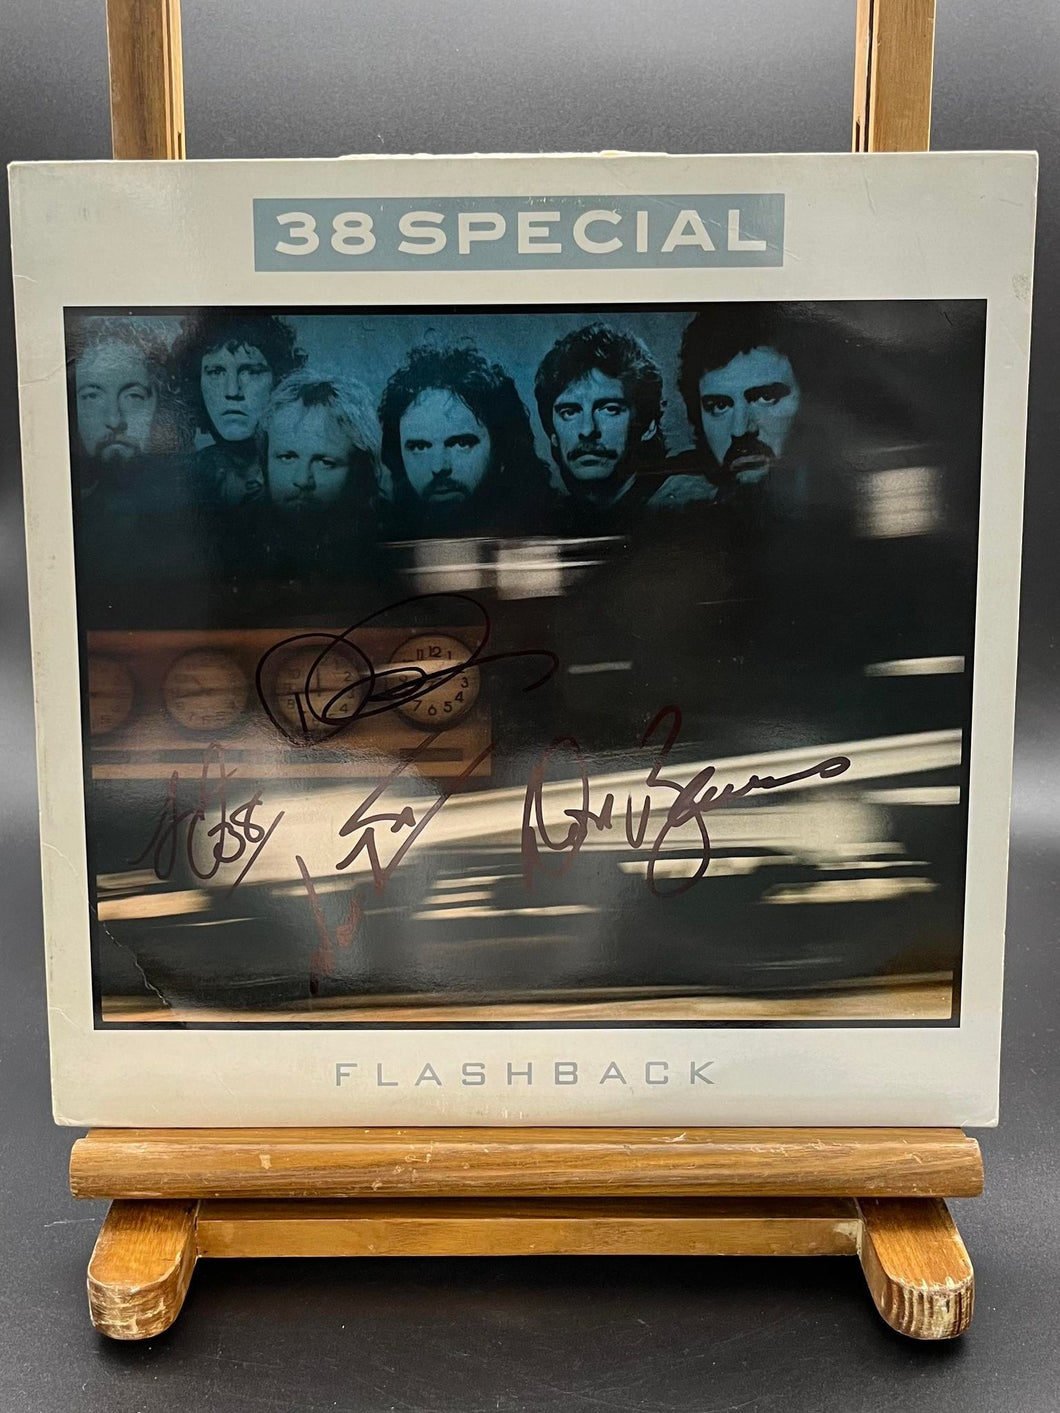 38 Special Vinyl Personally Signed by 4 Band Members